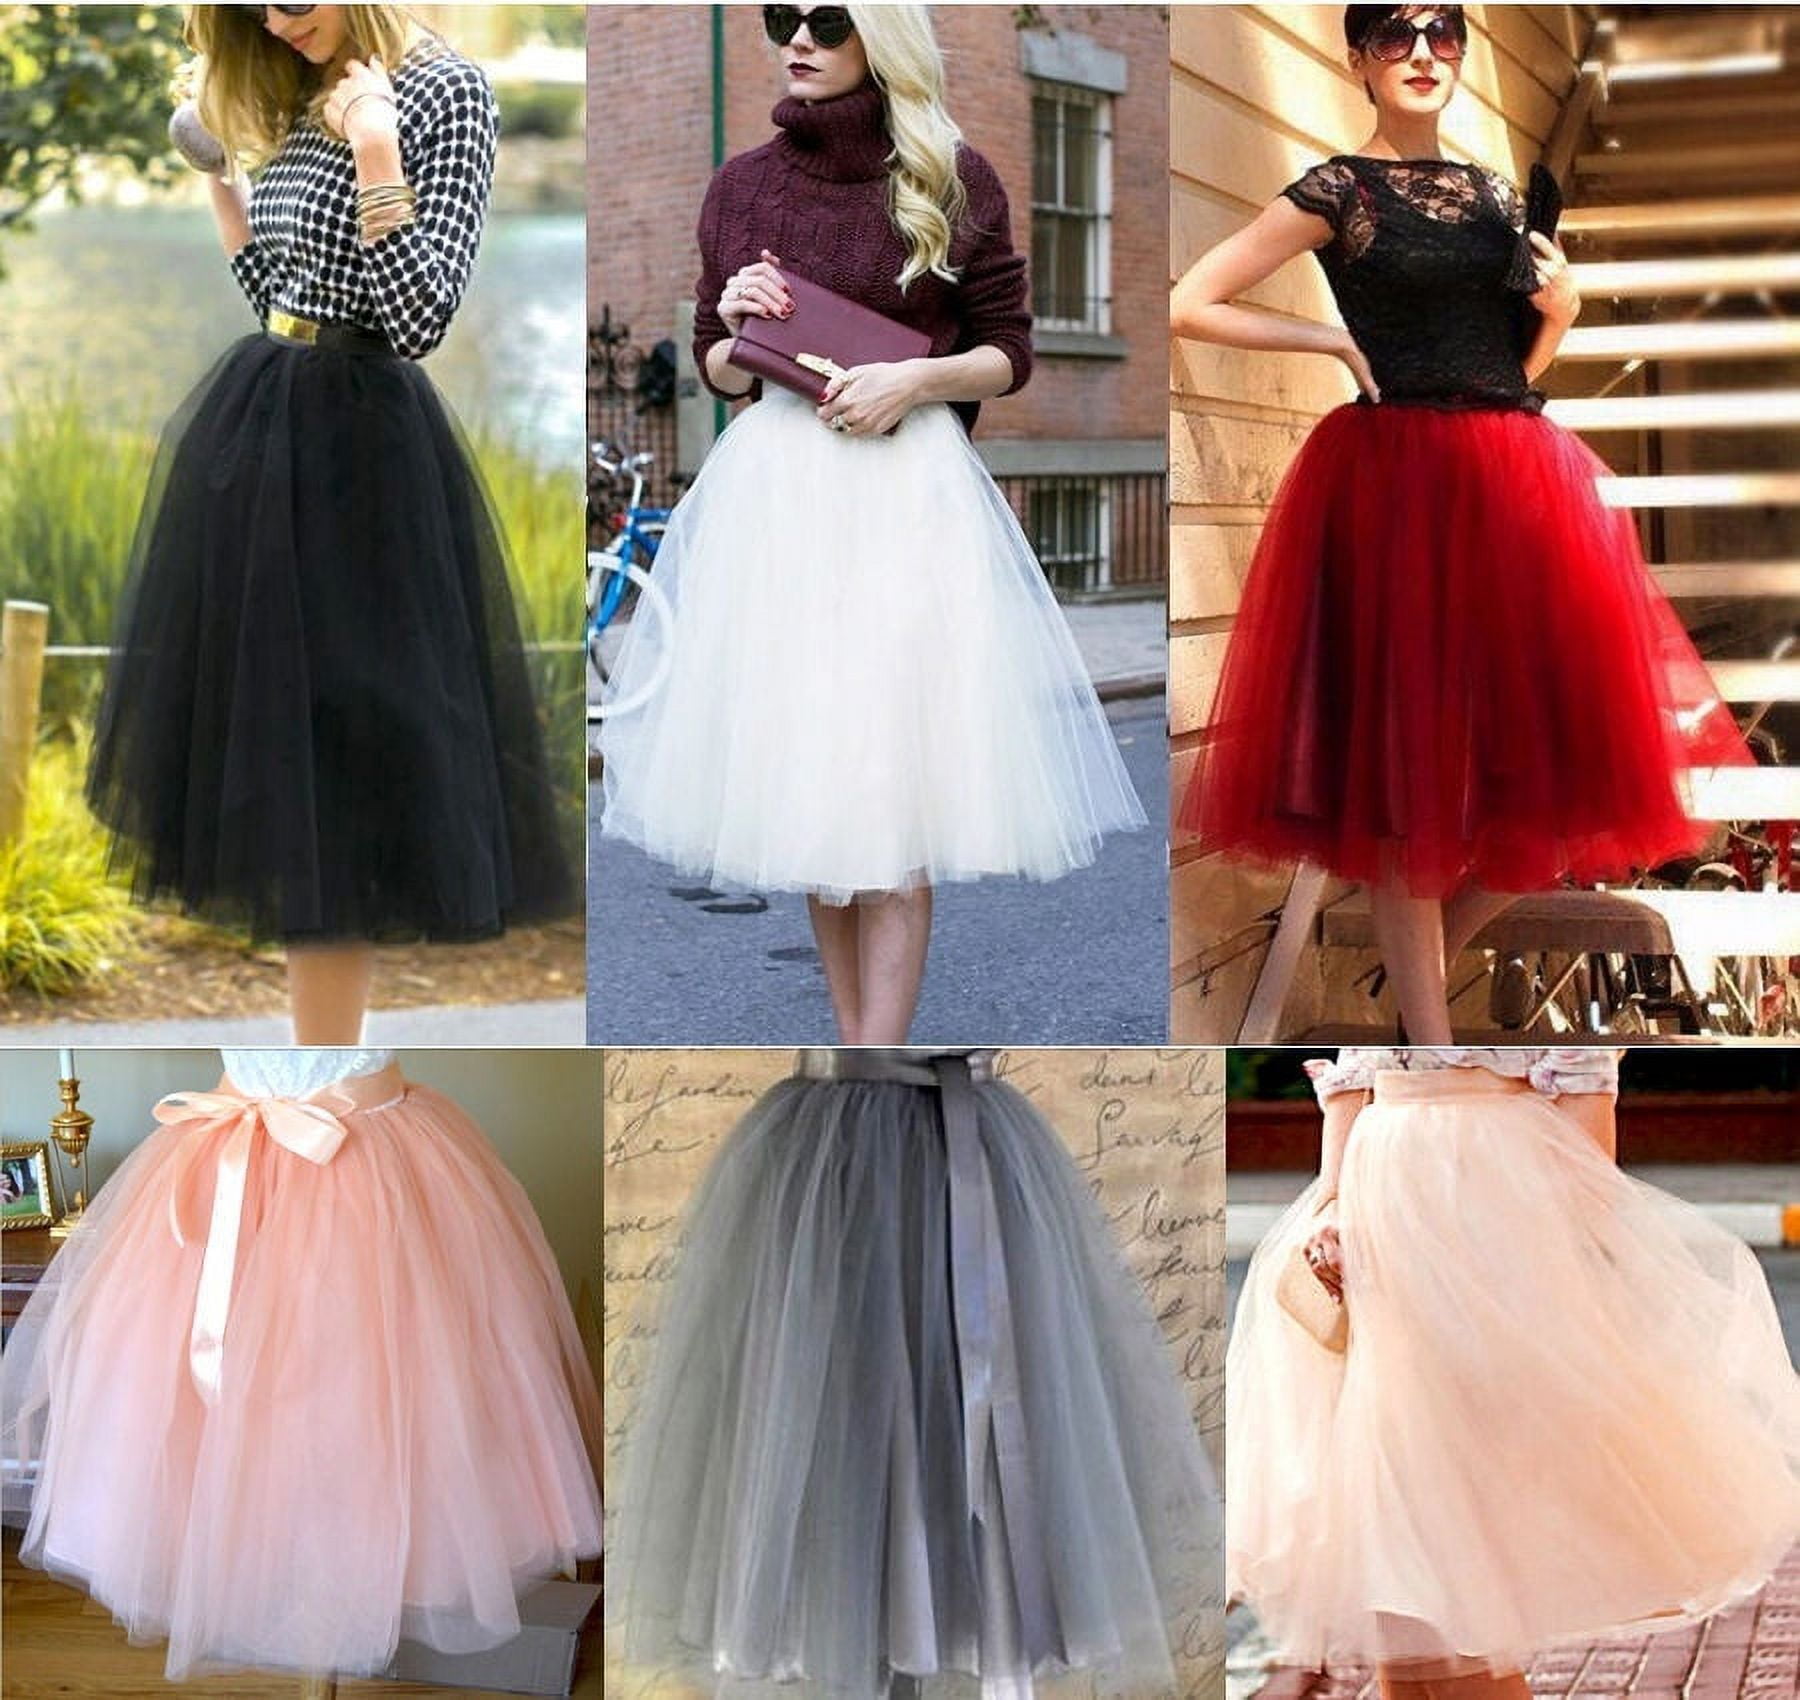 Fashion New 7 Layer Tulle Skirt Womens Vintage Dress 50s Rockabilly Tutu  Petticoat Ball Gown 